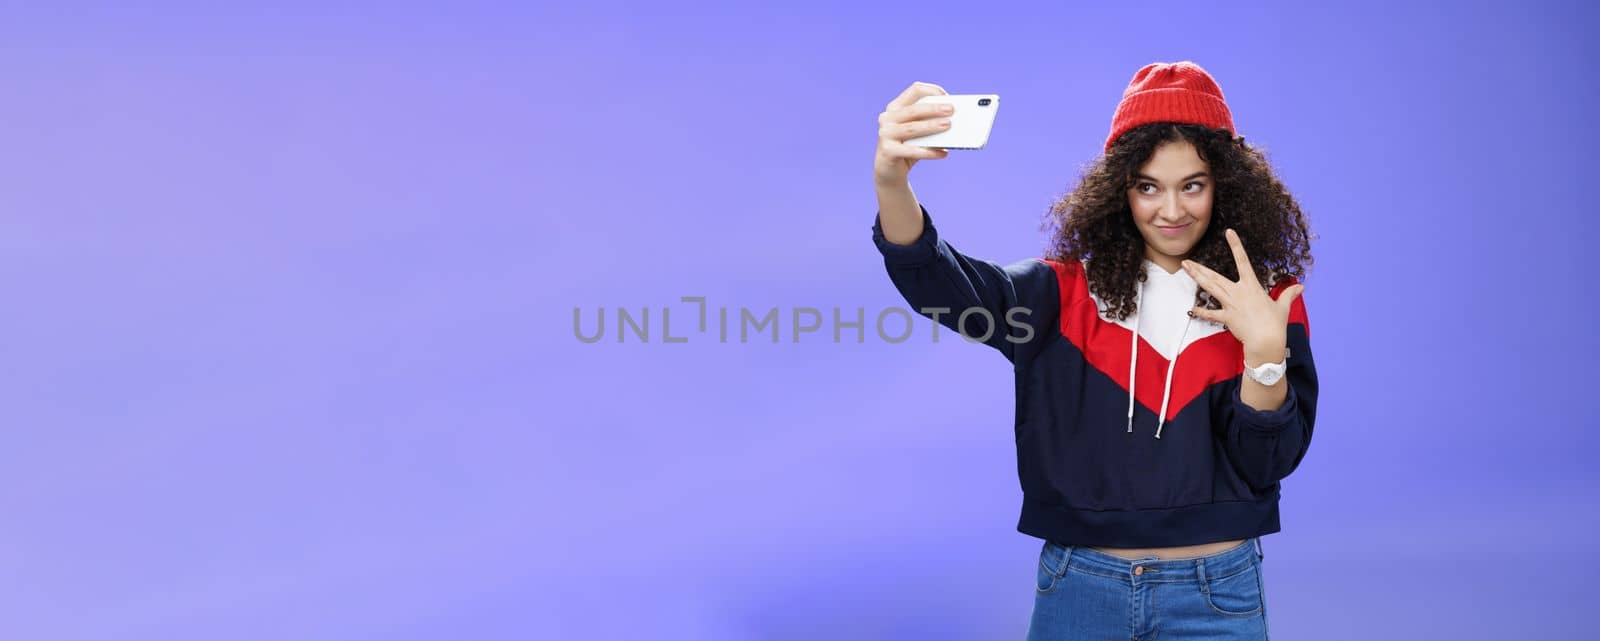 Lifestyle. Cool and stylish good-looking caucasian female with curly hair in trendy red beanie and sweatshirt looking from under forehead awesome and swah taking selfie with smartphone holded in extended arm.